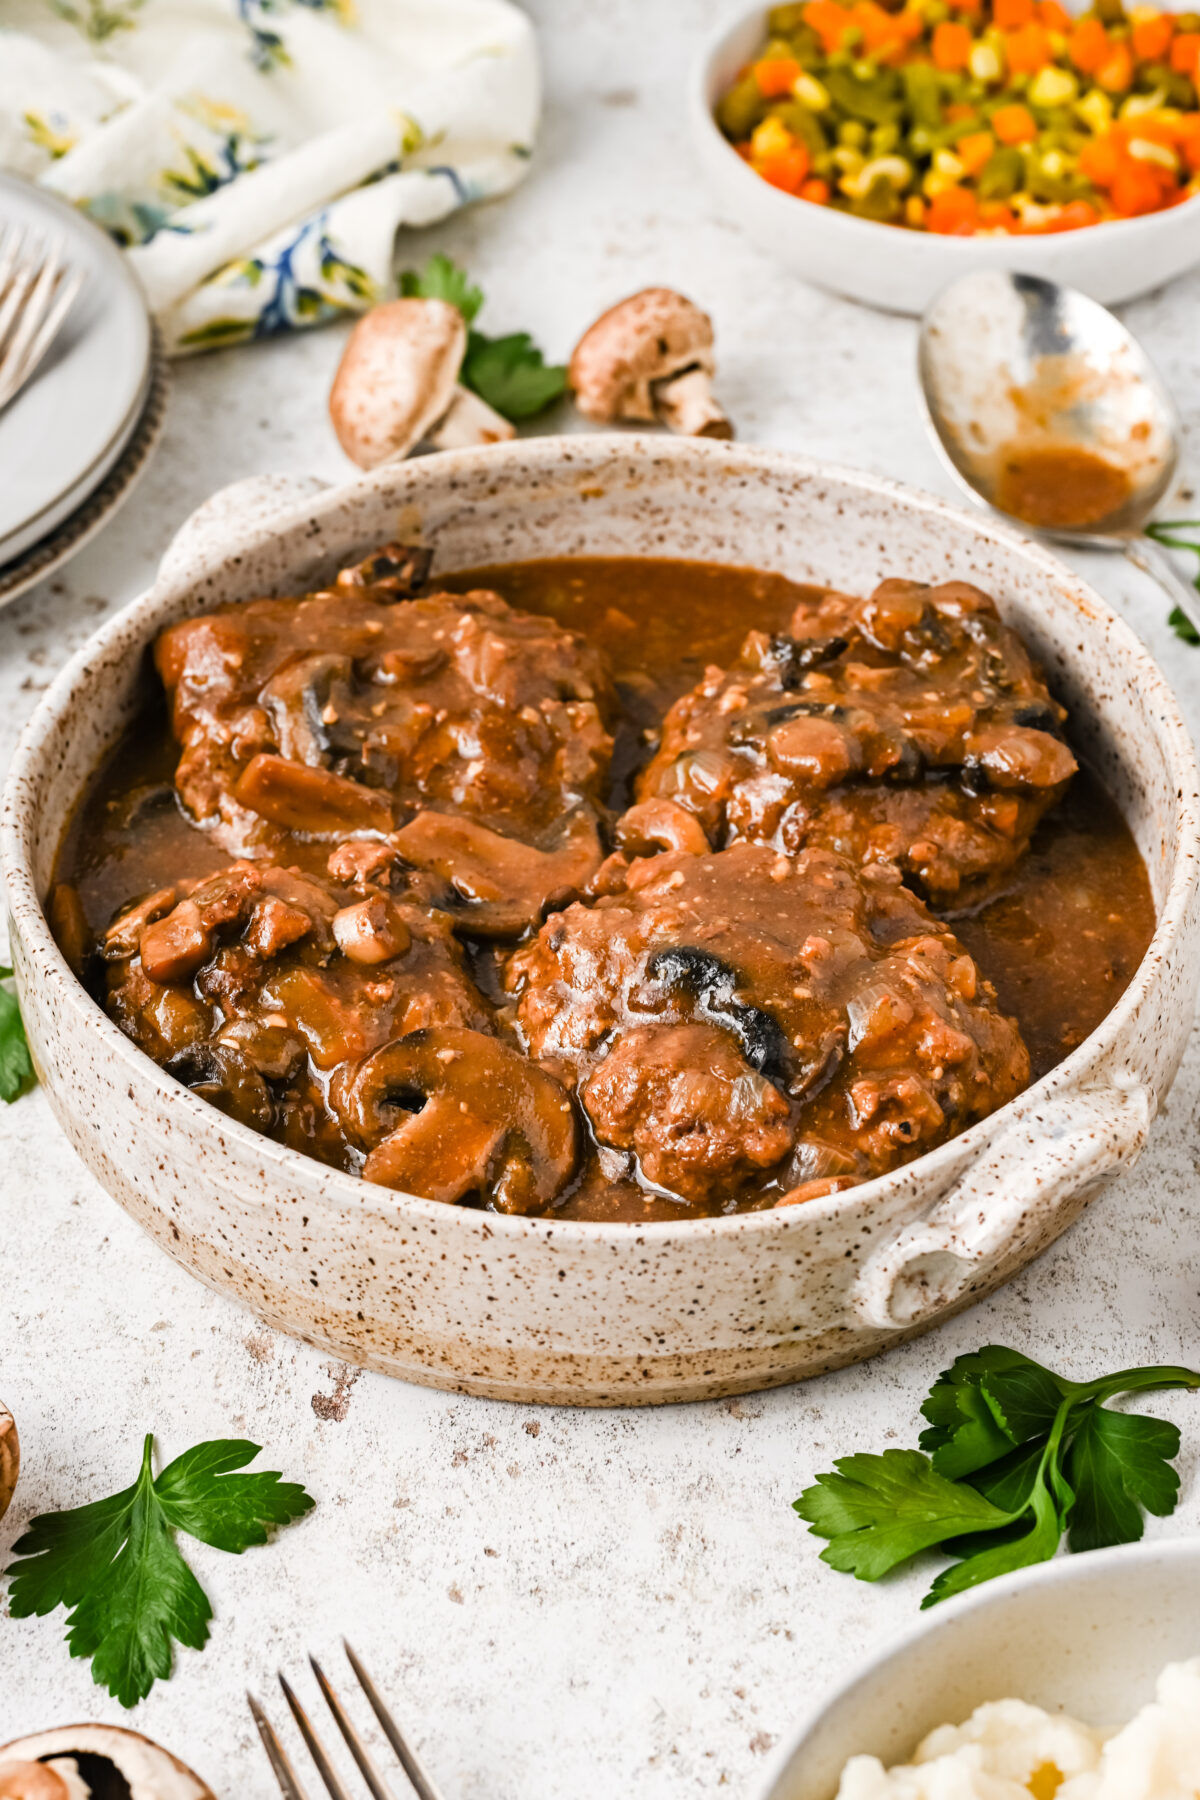 Looking for a delicious, easy and quick dinner idea? Try this Instant Pot Salisbury Steak recipe. It's sure to be a family favourite!